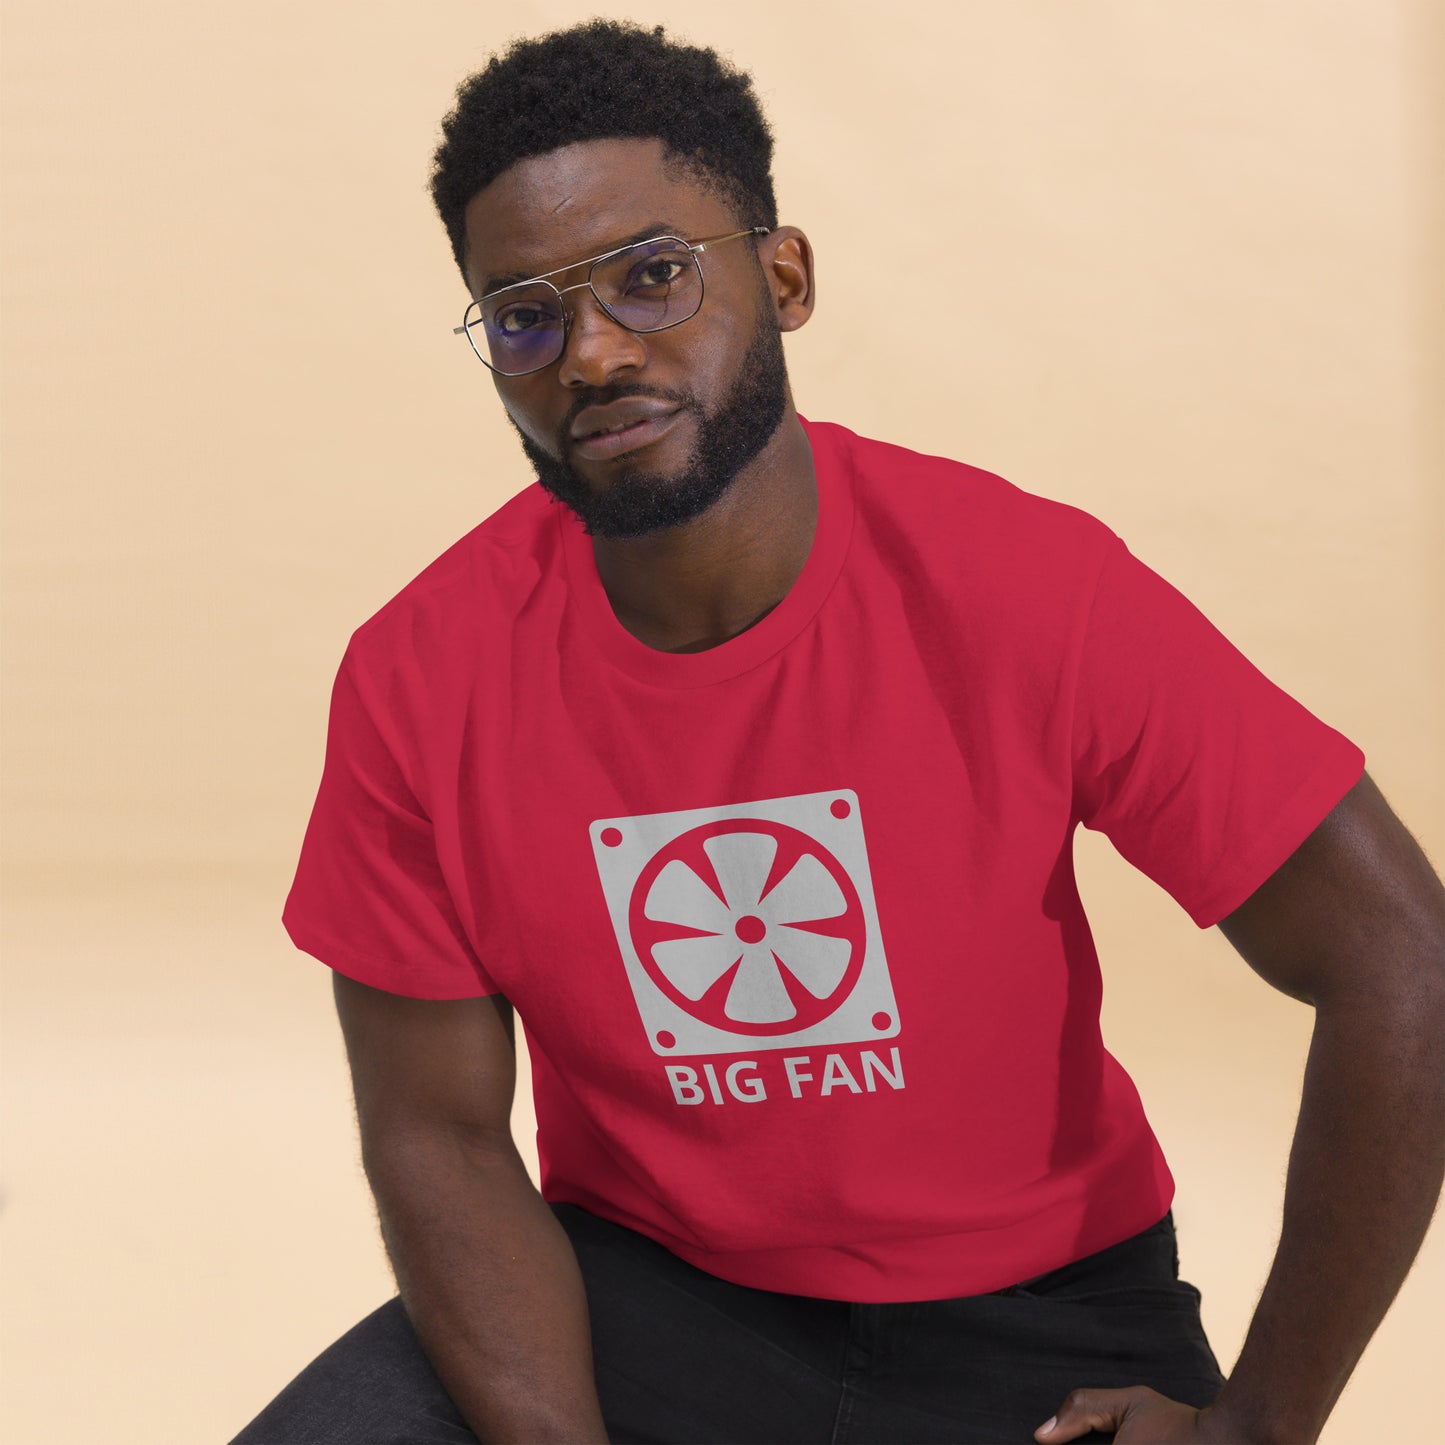 Man with cardinal red t-shirt with image of a big computer fan and the text "BIG FAN"